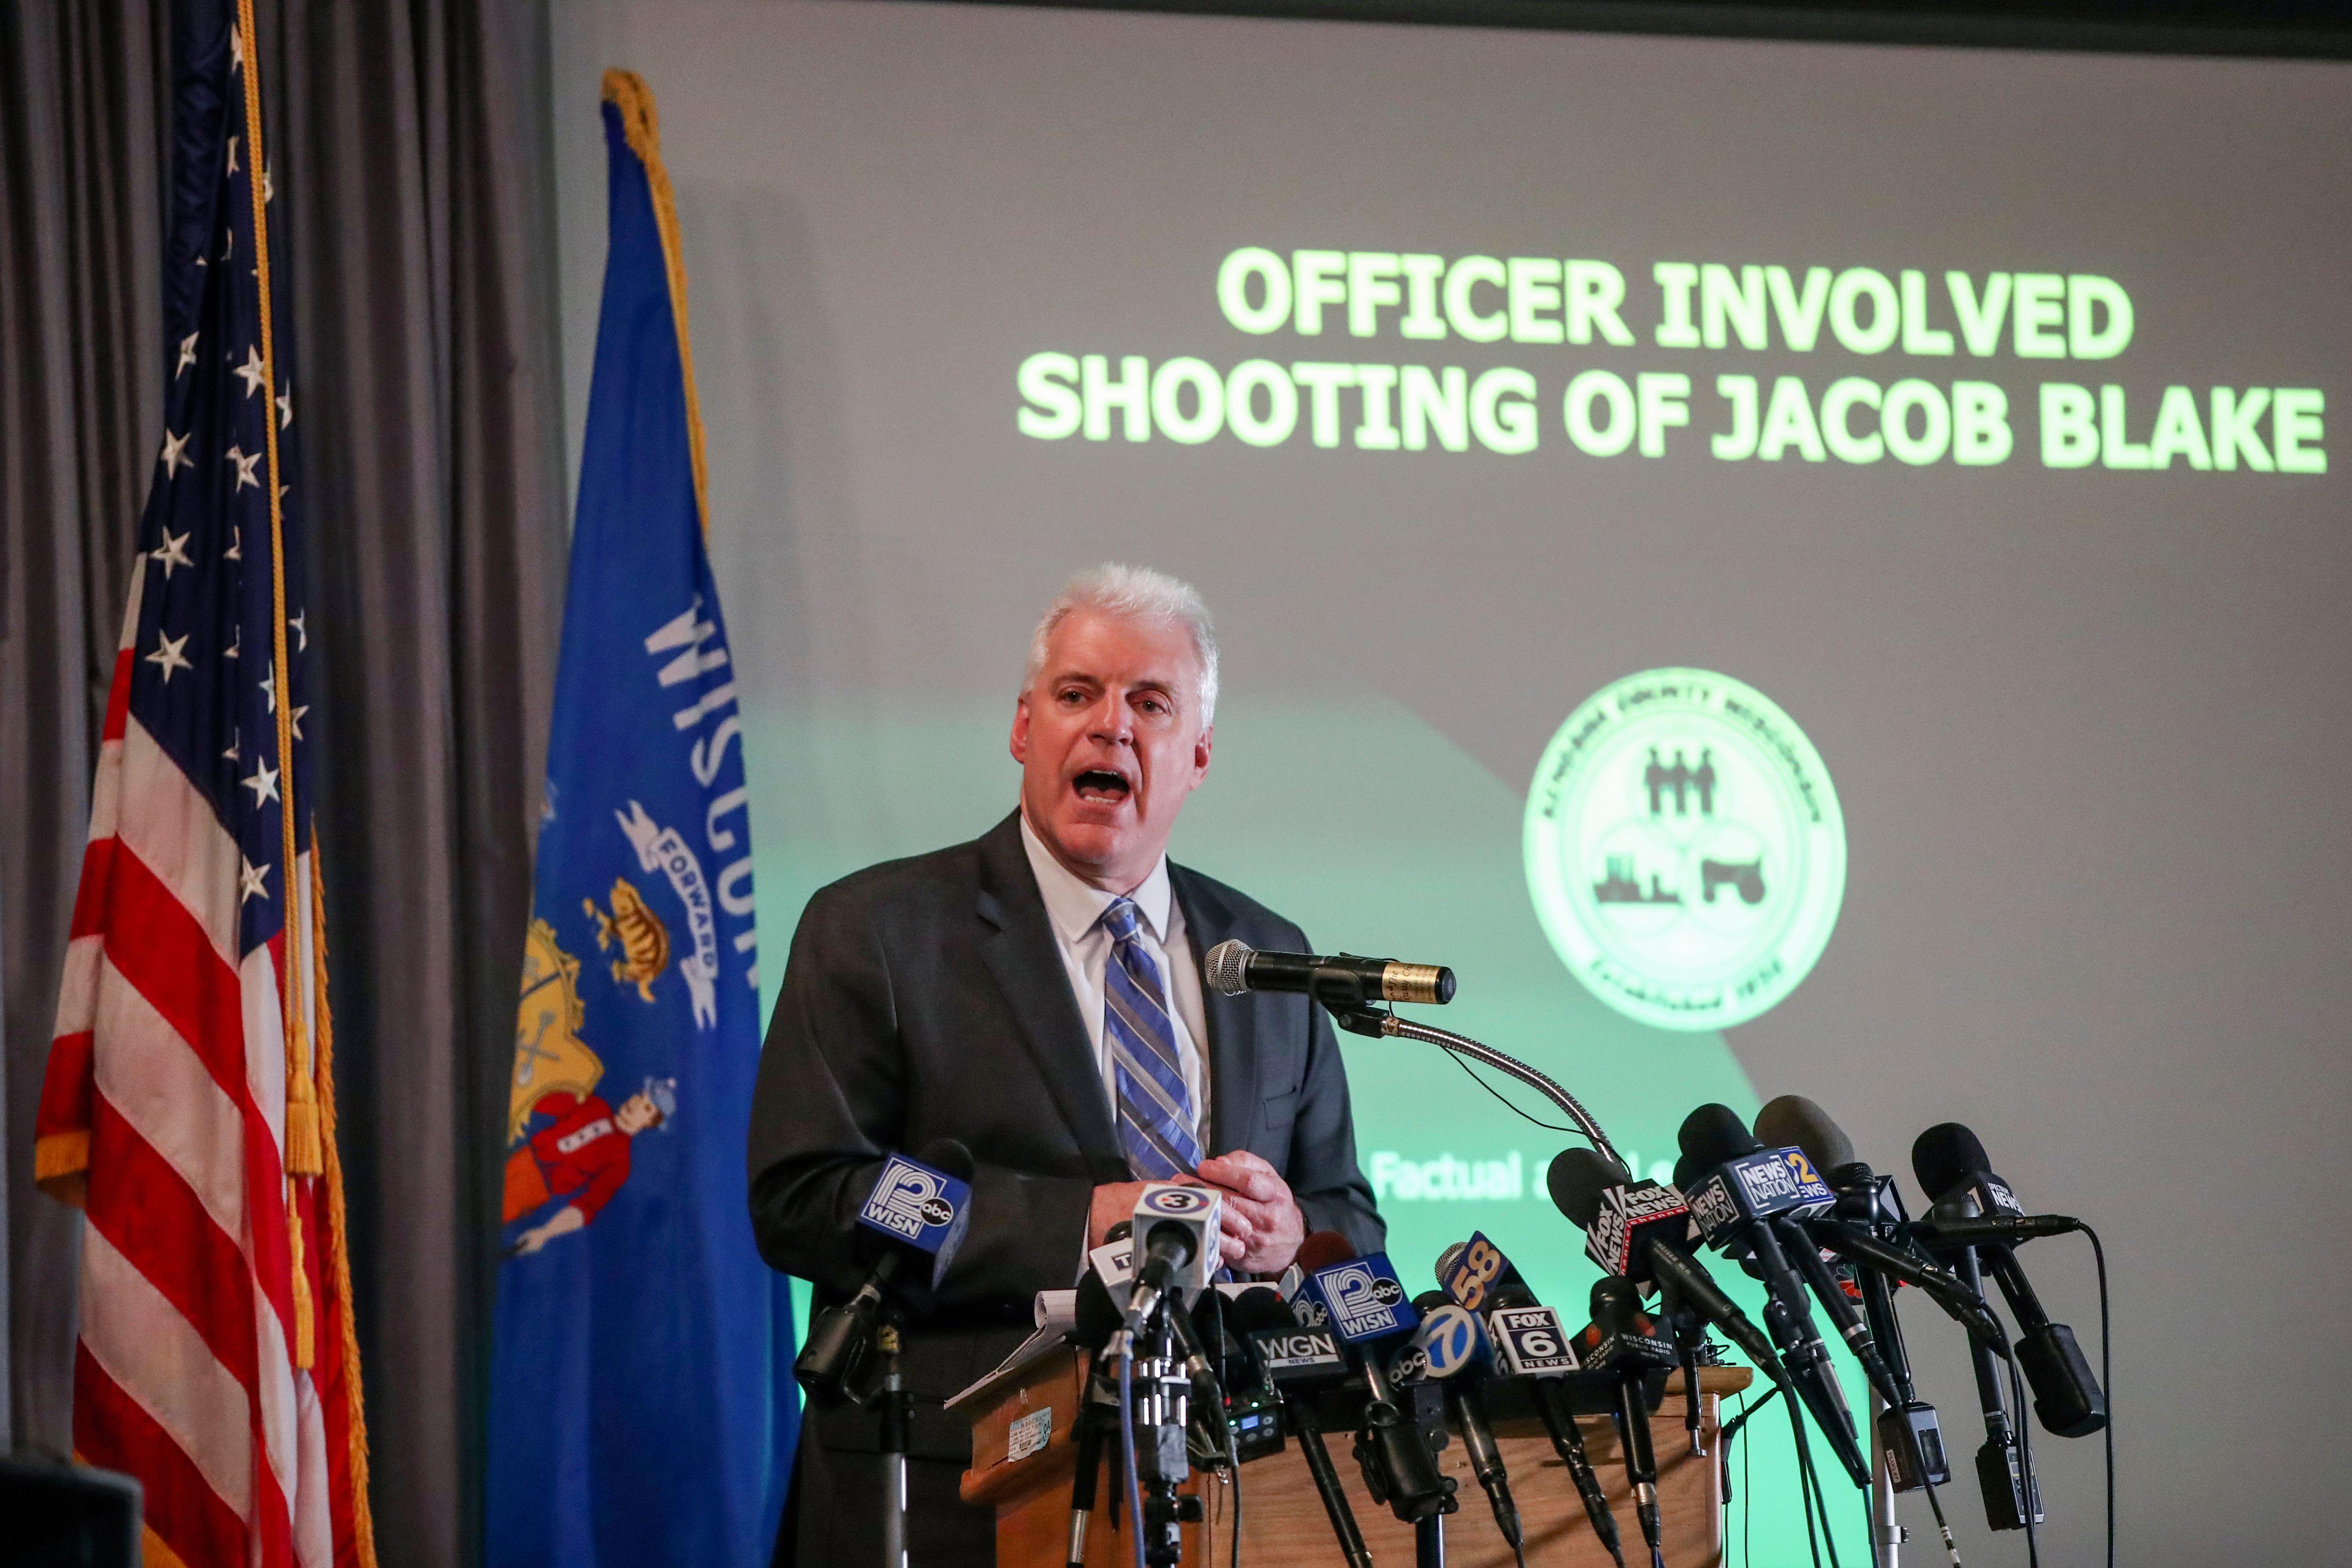 Kenosha District Attorney Michael Graveley speaks at a mic in front of a screen that reads "Officer Involved Shooting of Jacob Blake"